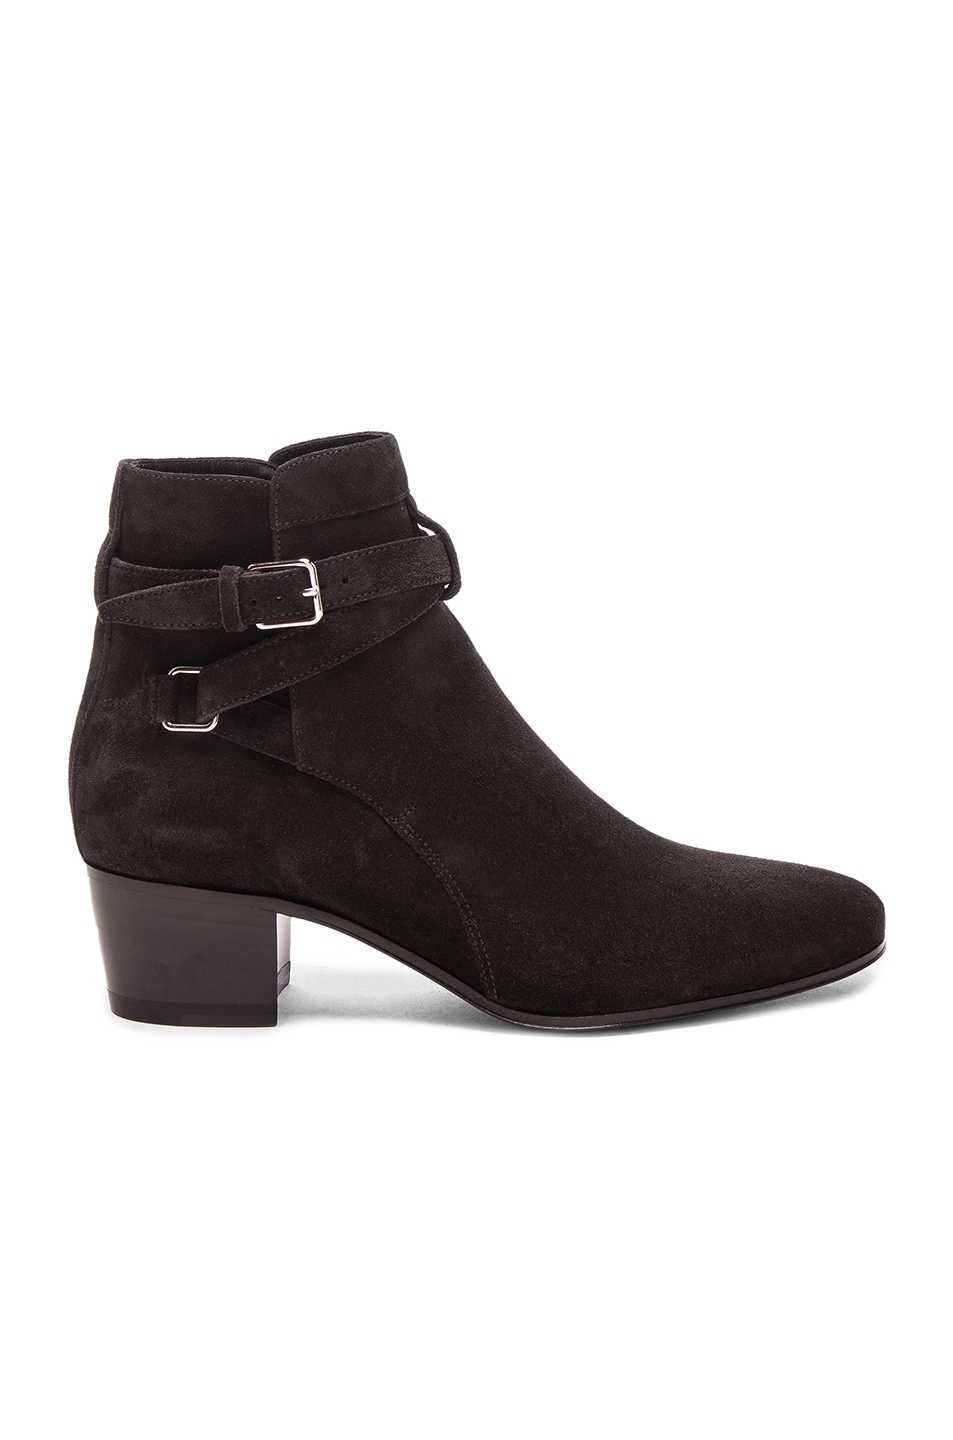 Image 1 of Saint Laurent Suede Blake Boots in Lavagna